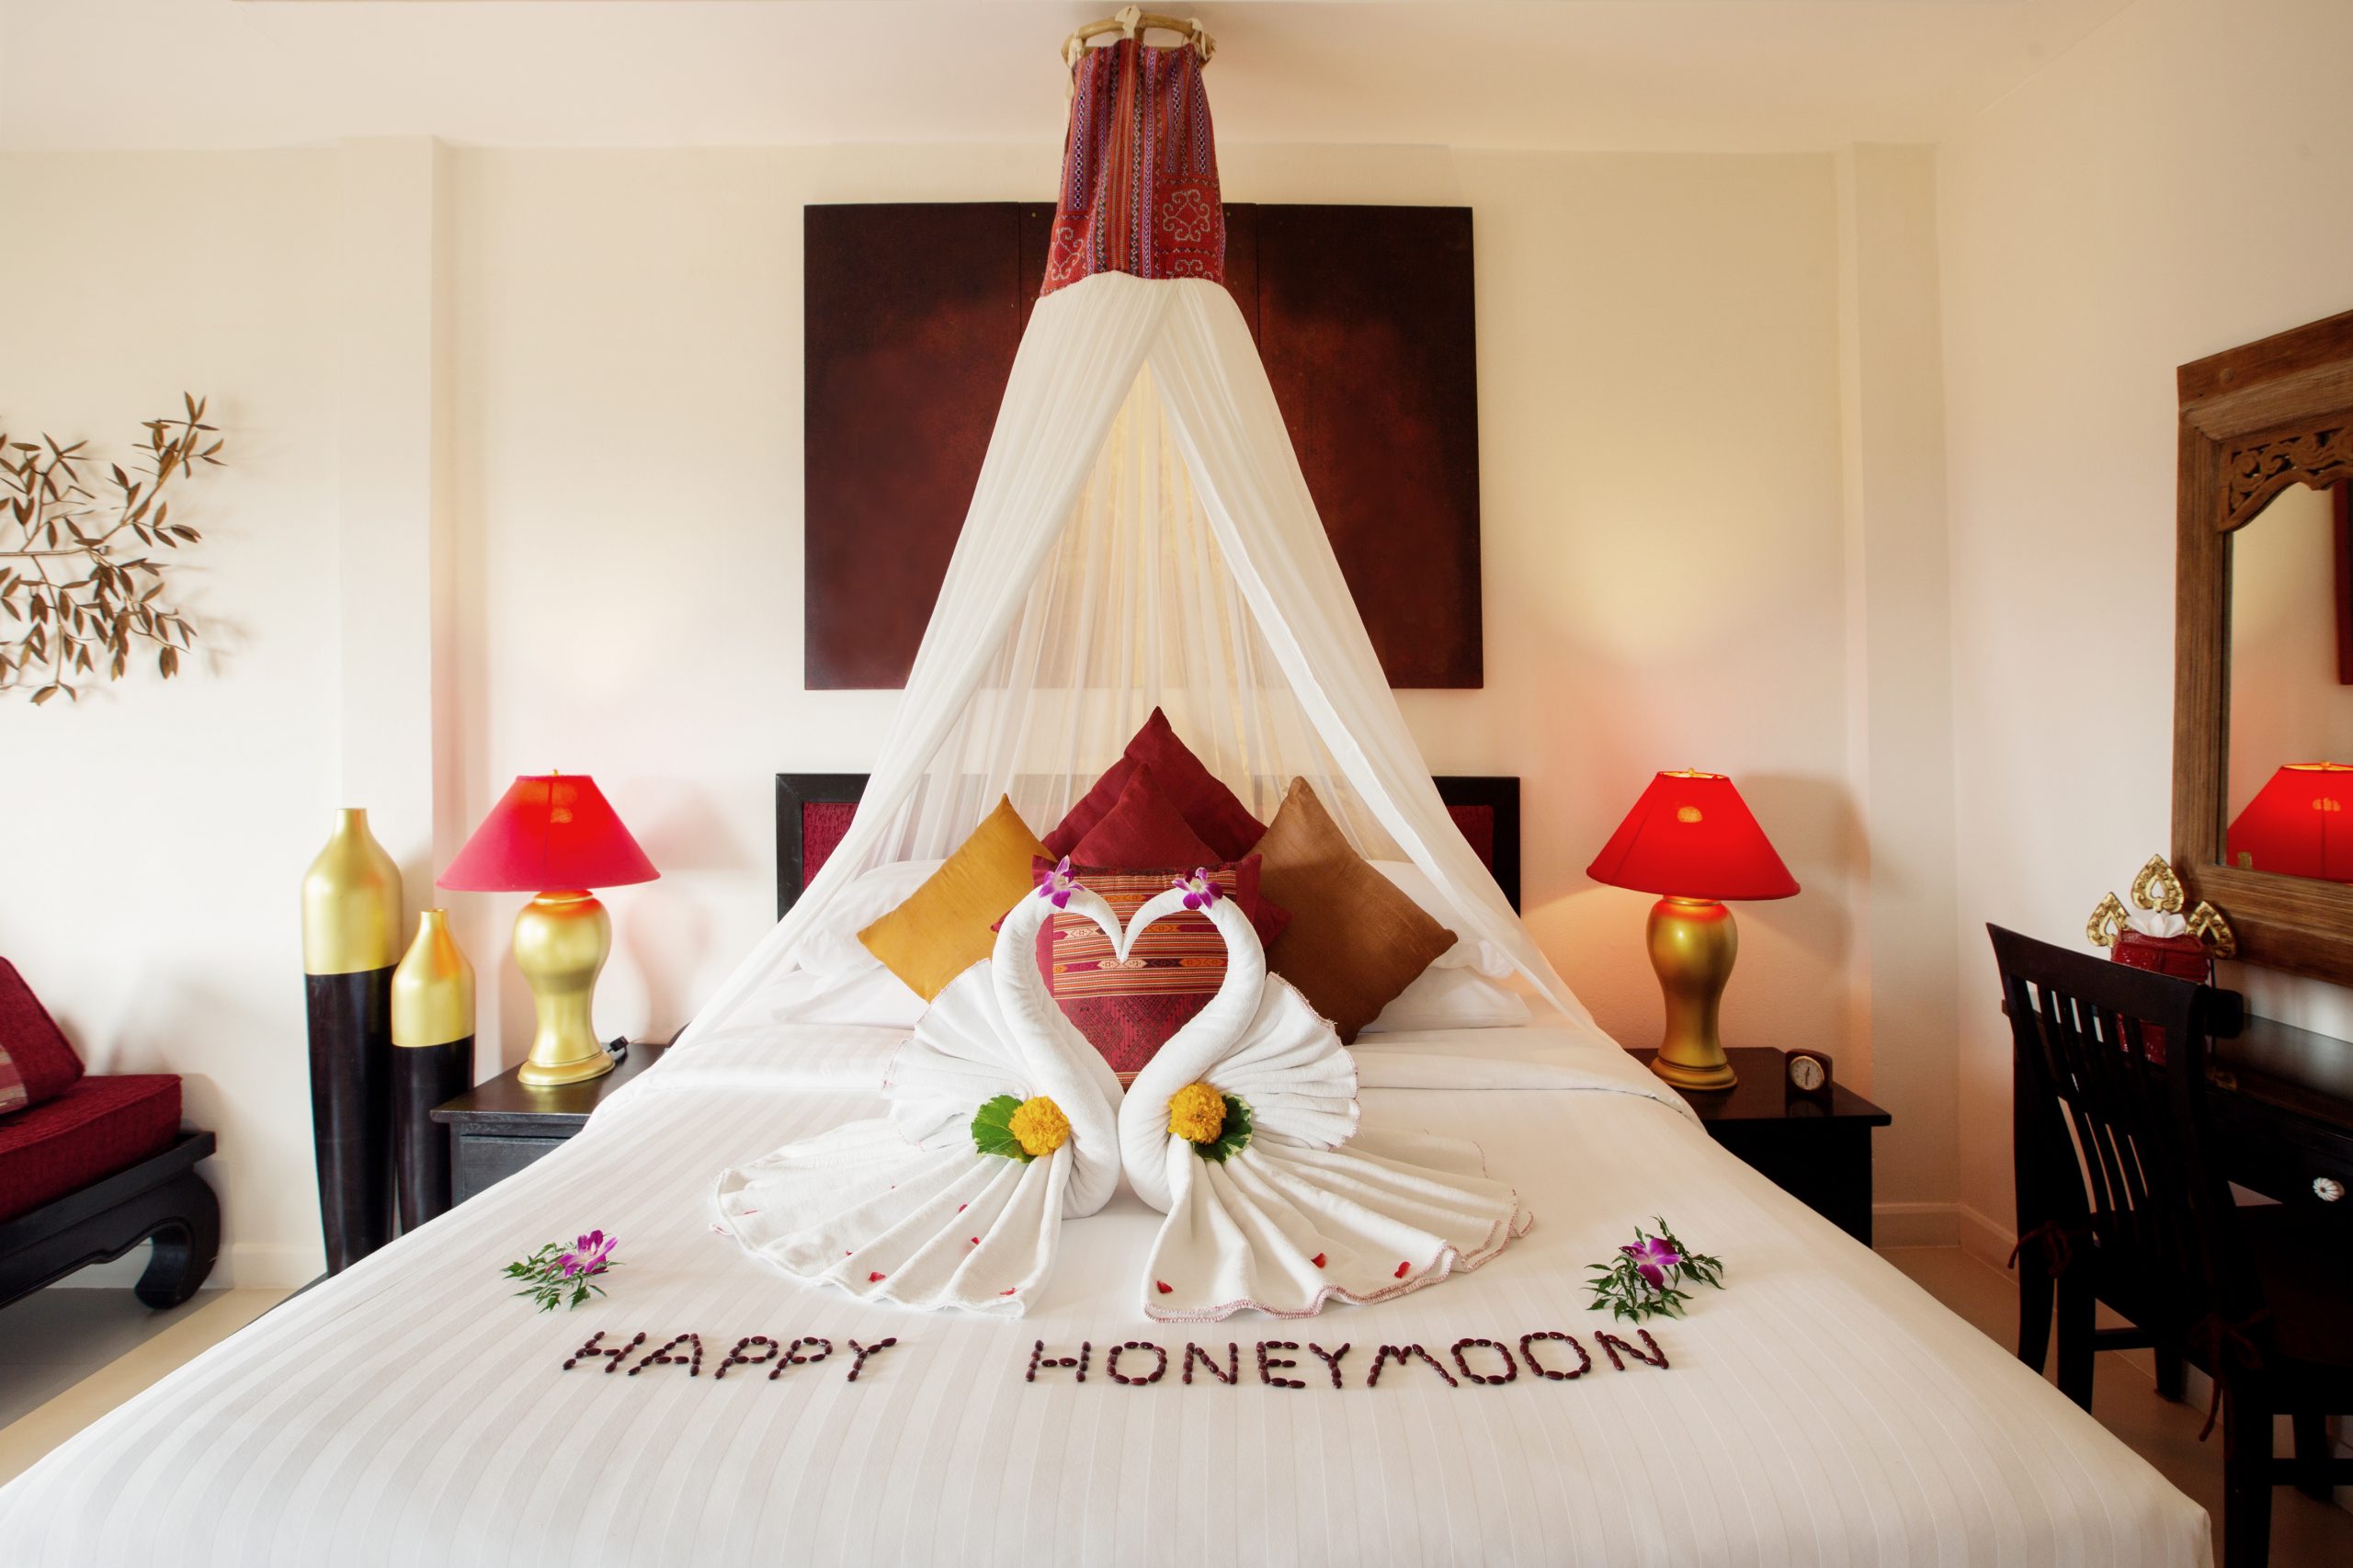 Luxury hotel bedroom interior with honeymoon decoration - Busy Being